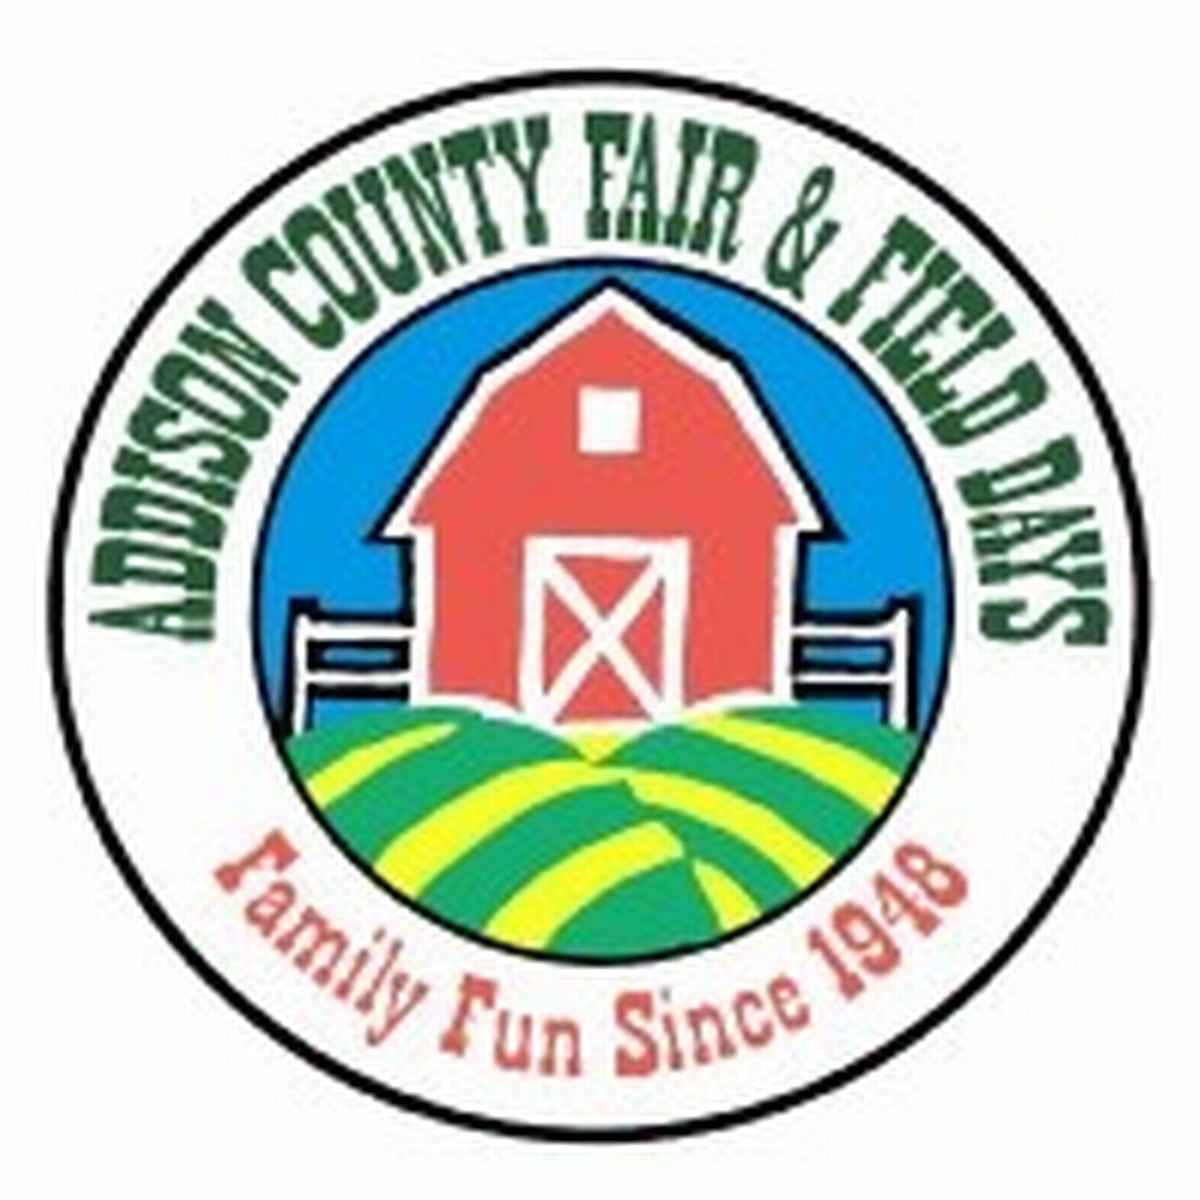 Addison County Fair & Field Days Aug 10, 2021 to Aug 14, 2021 Page